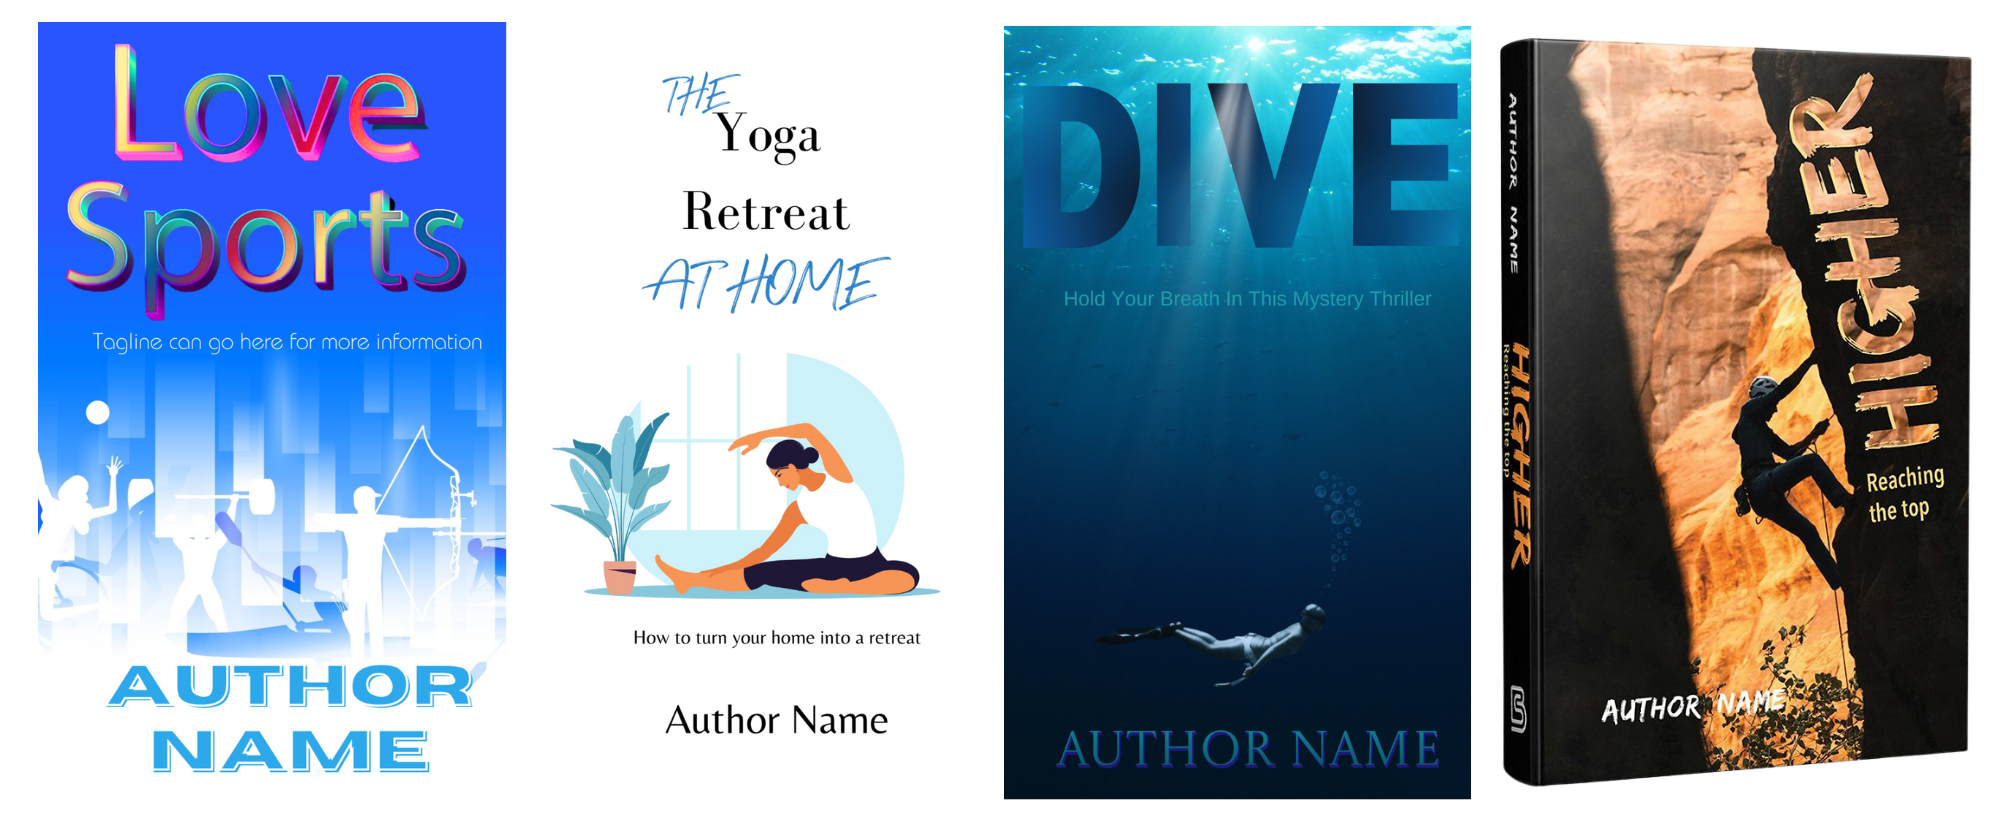 A series of four book covers is shown. From left to right: "Love Sports" features abstract athletes and vibrant colors. "The Yoga Retreat at Home" depicts a figure in a yoga pose with calming colors. "DIVE" shows a deep blue ocean scene. "HIGHER" shows a person climbing a steep rock face. BookSelf Book Cover Design & Premade Book Covers